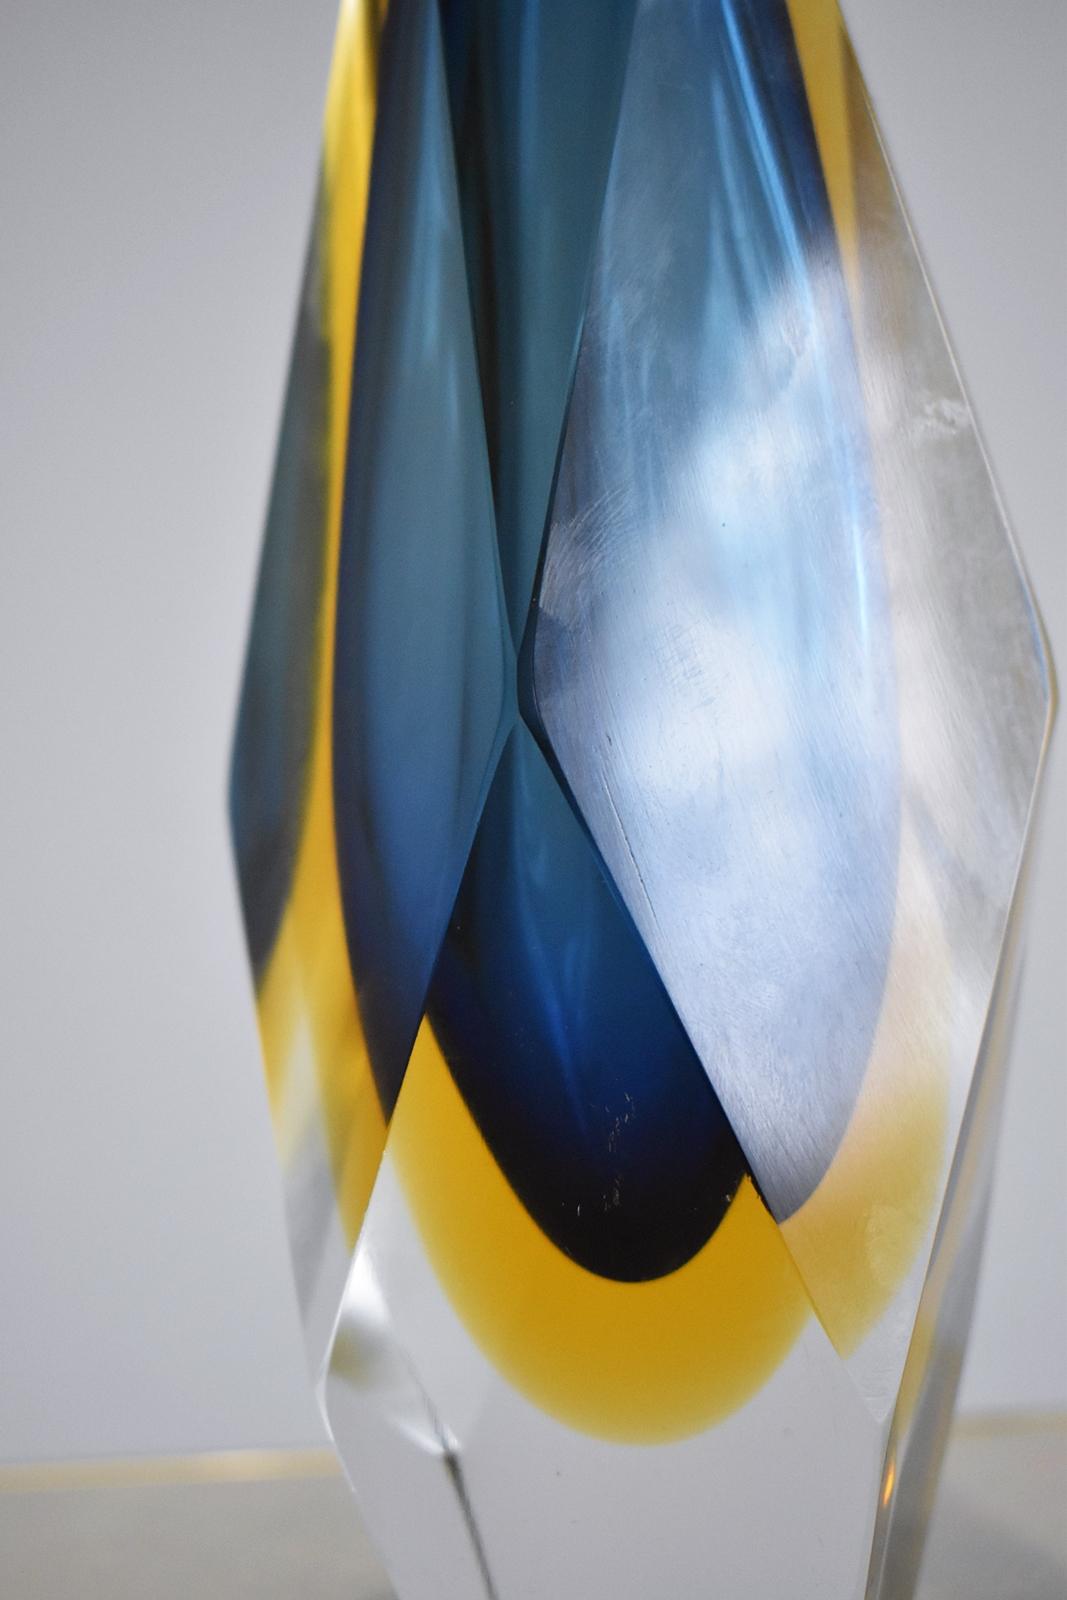 Midcentury Faceted Murano Glass Strong Blue and Yellow Sommerso Vase 1